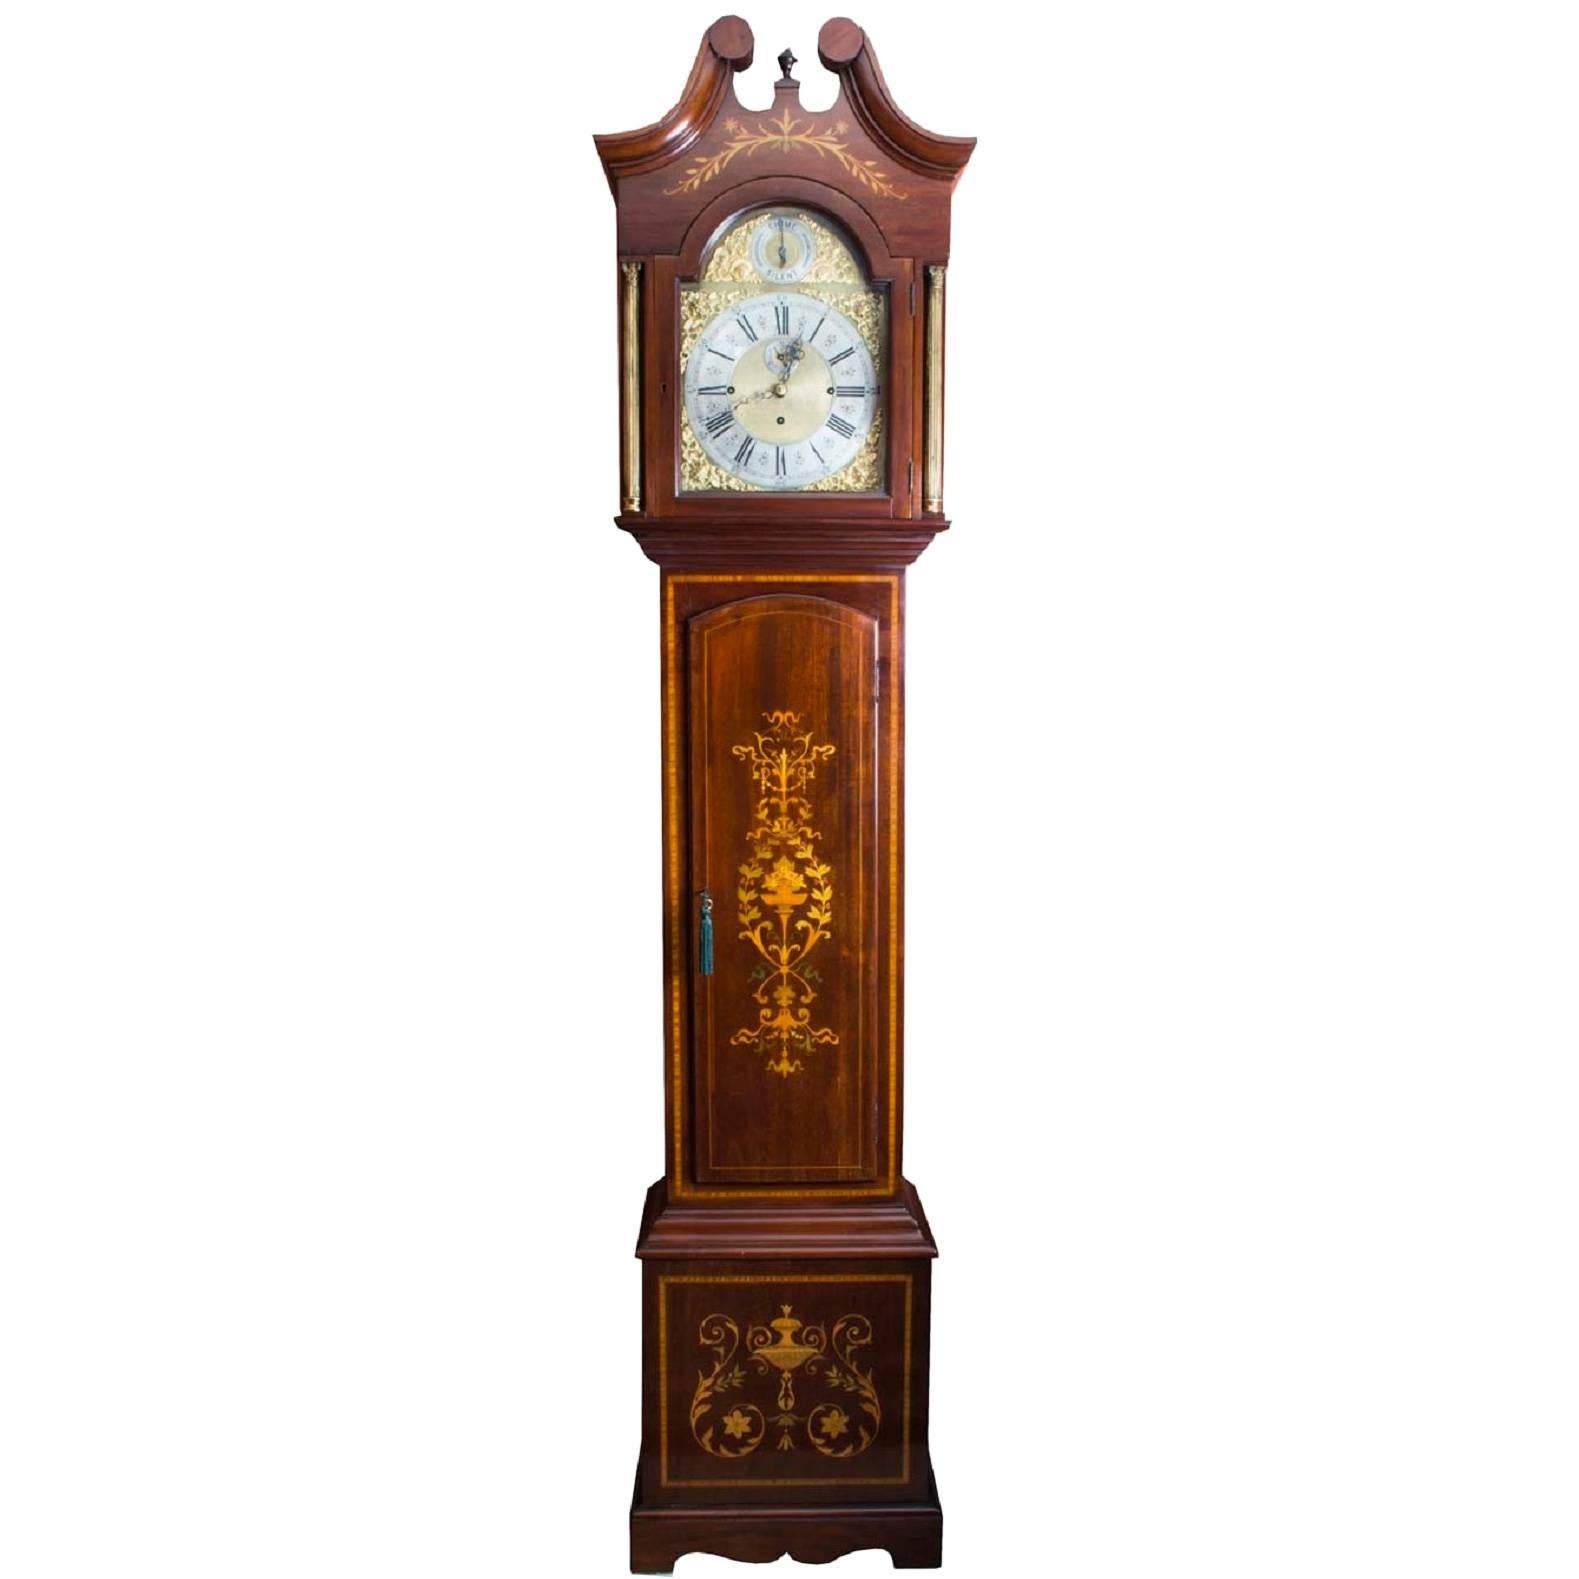 Antique Inlaid Grandfather Clock Chiming on Eight Bells and Gong